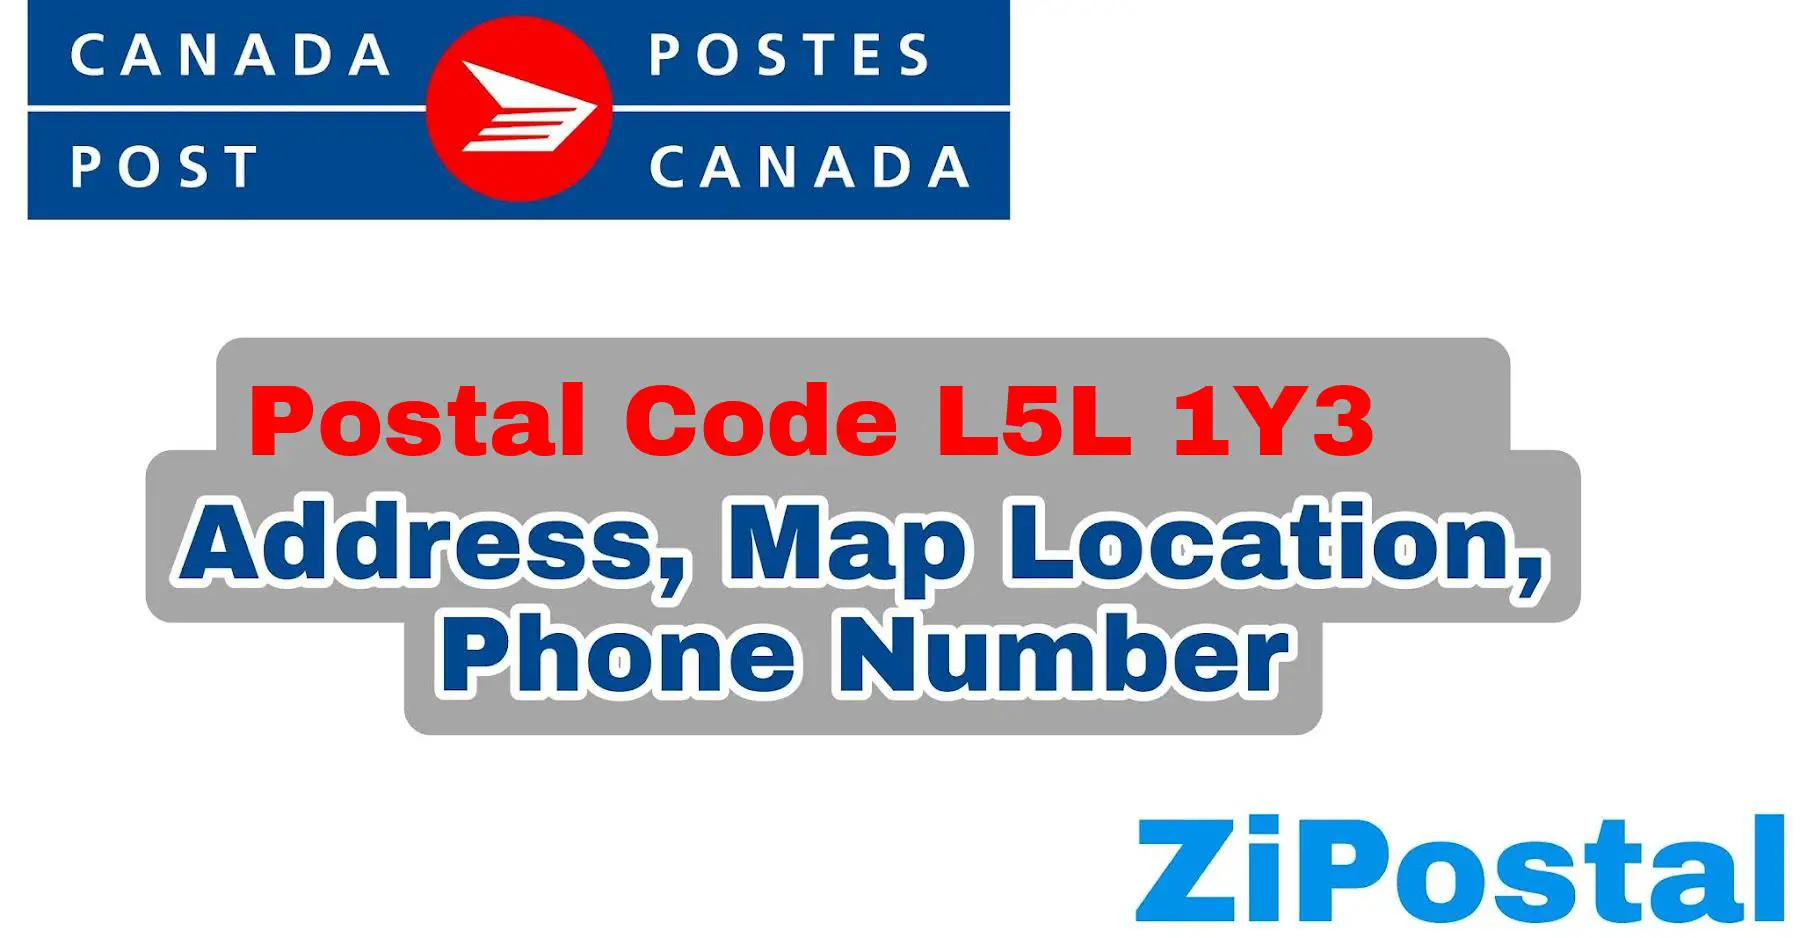 Postal Code L5L 1Y3 Address Map Location and Phone Number